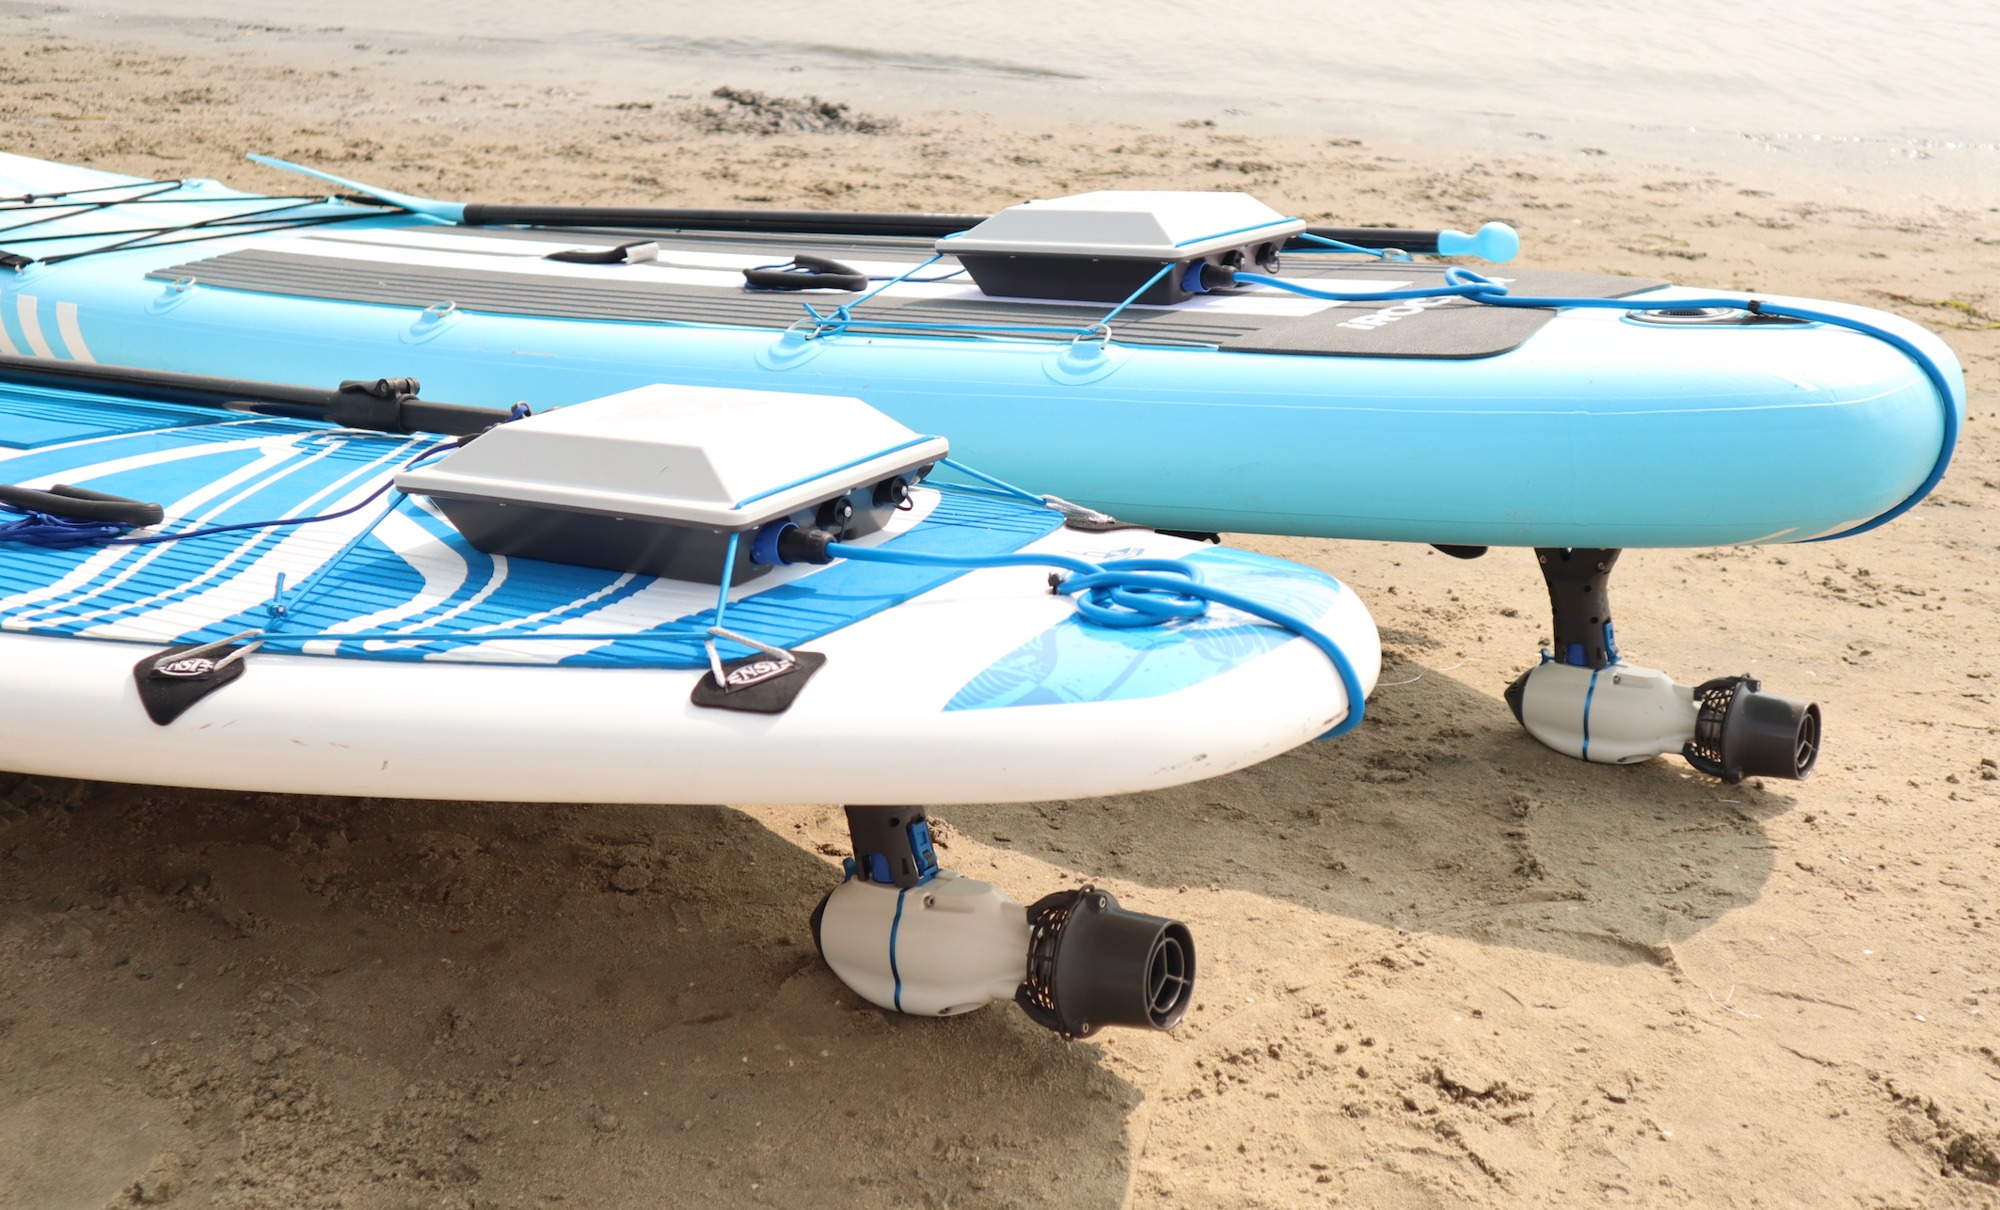 Paddleboards featuring Bixpy outboard batteries